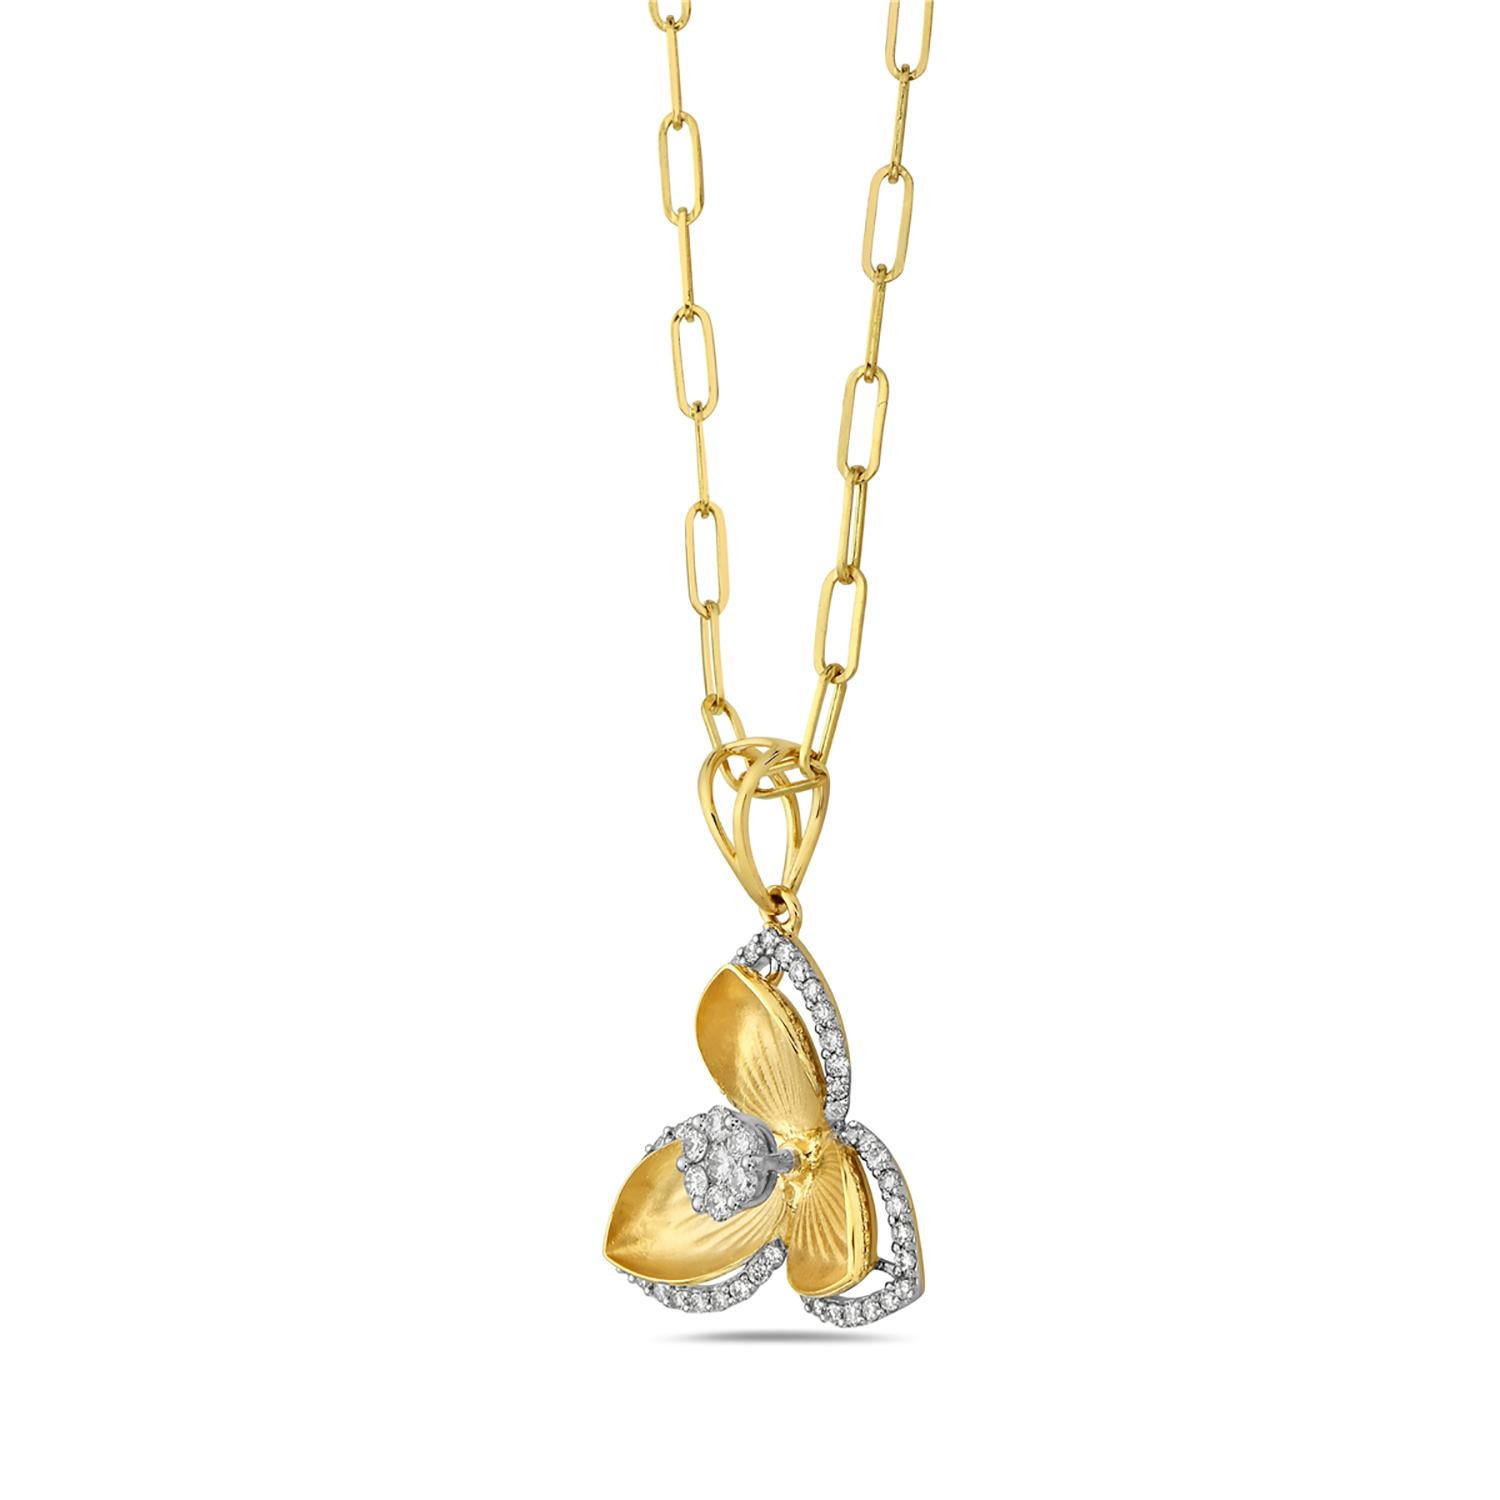 Artisan Flower Shaped Pendant with Carved Petals Equipped with Halo Diamonds in 14k Gold For Sale